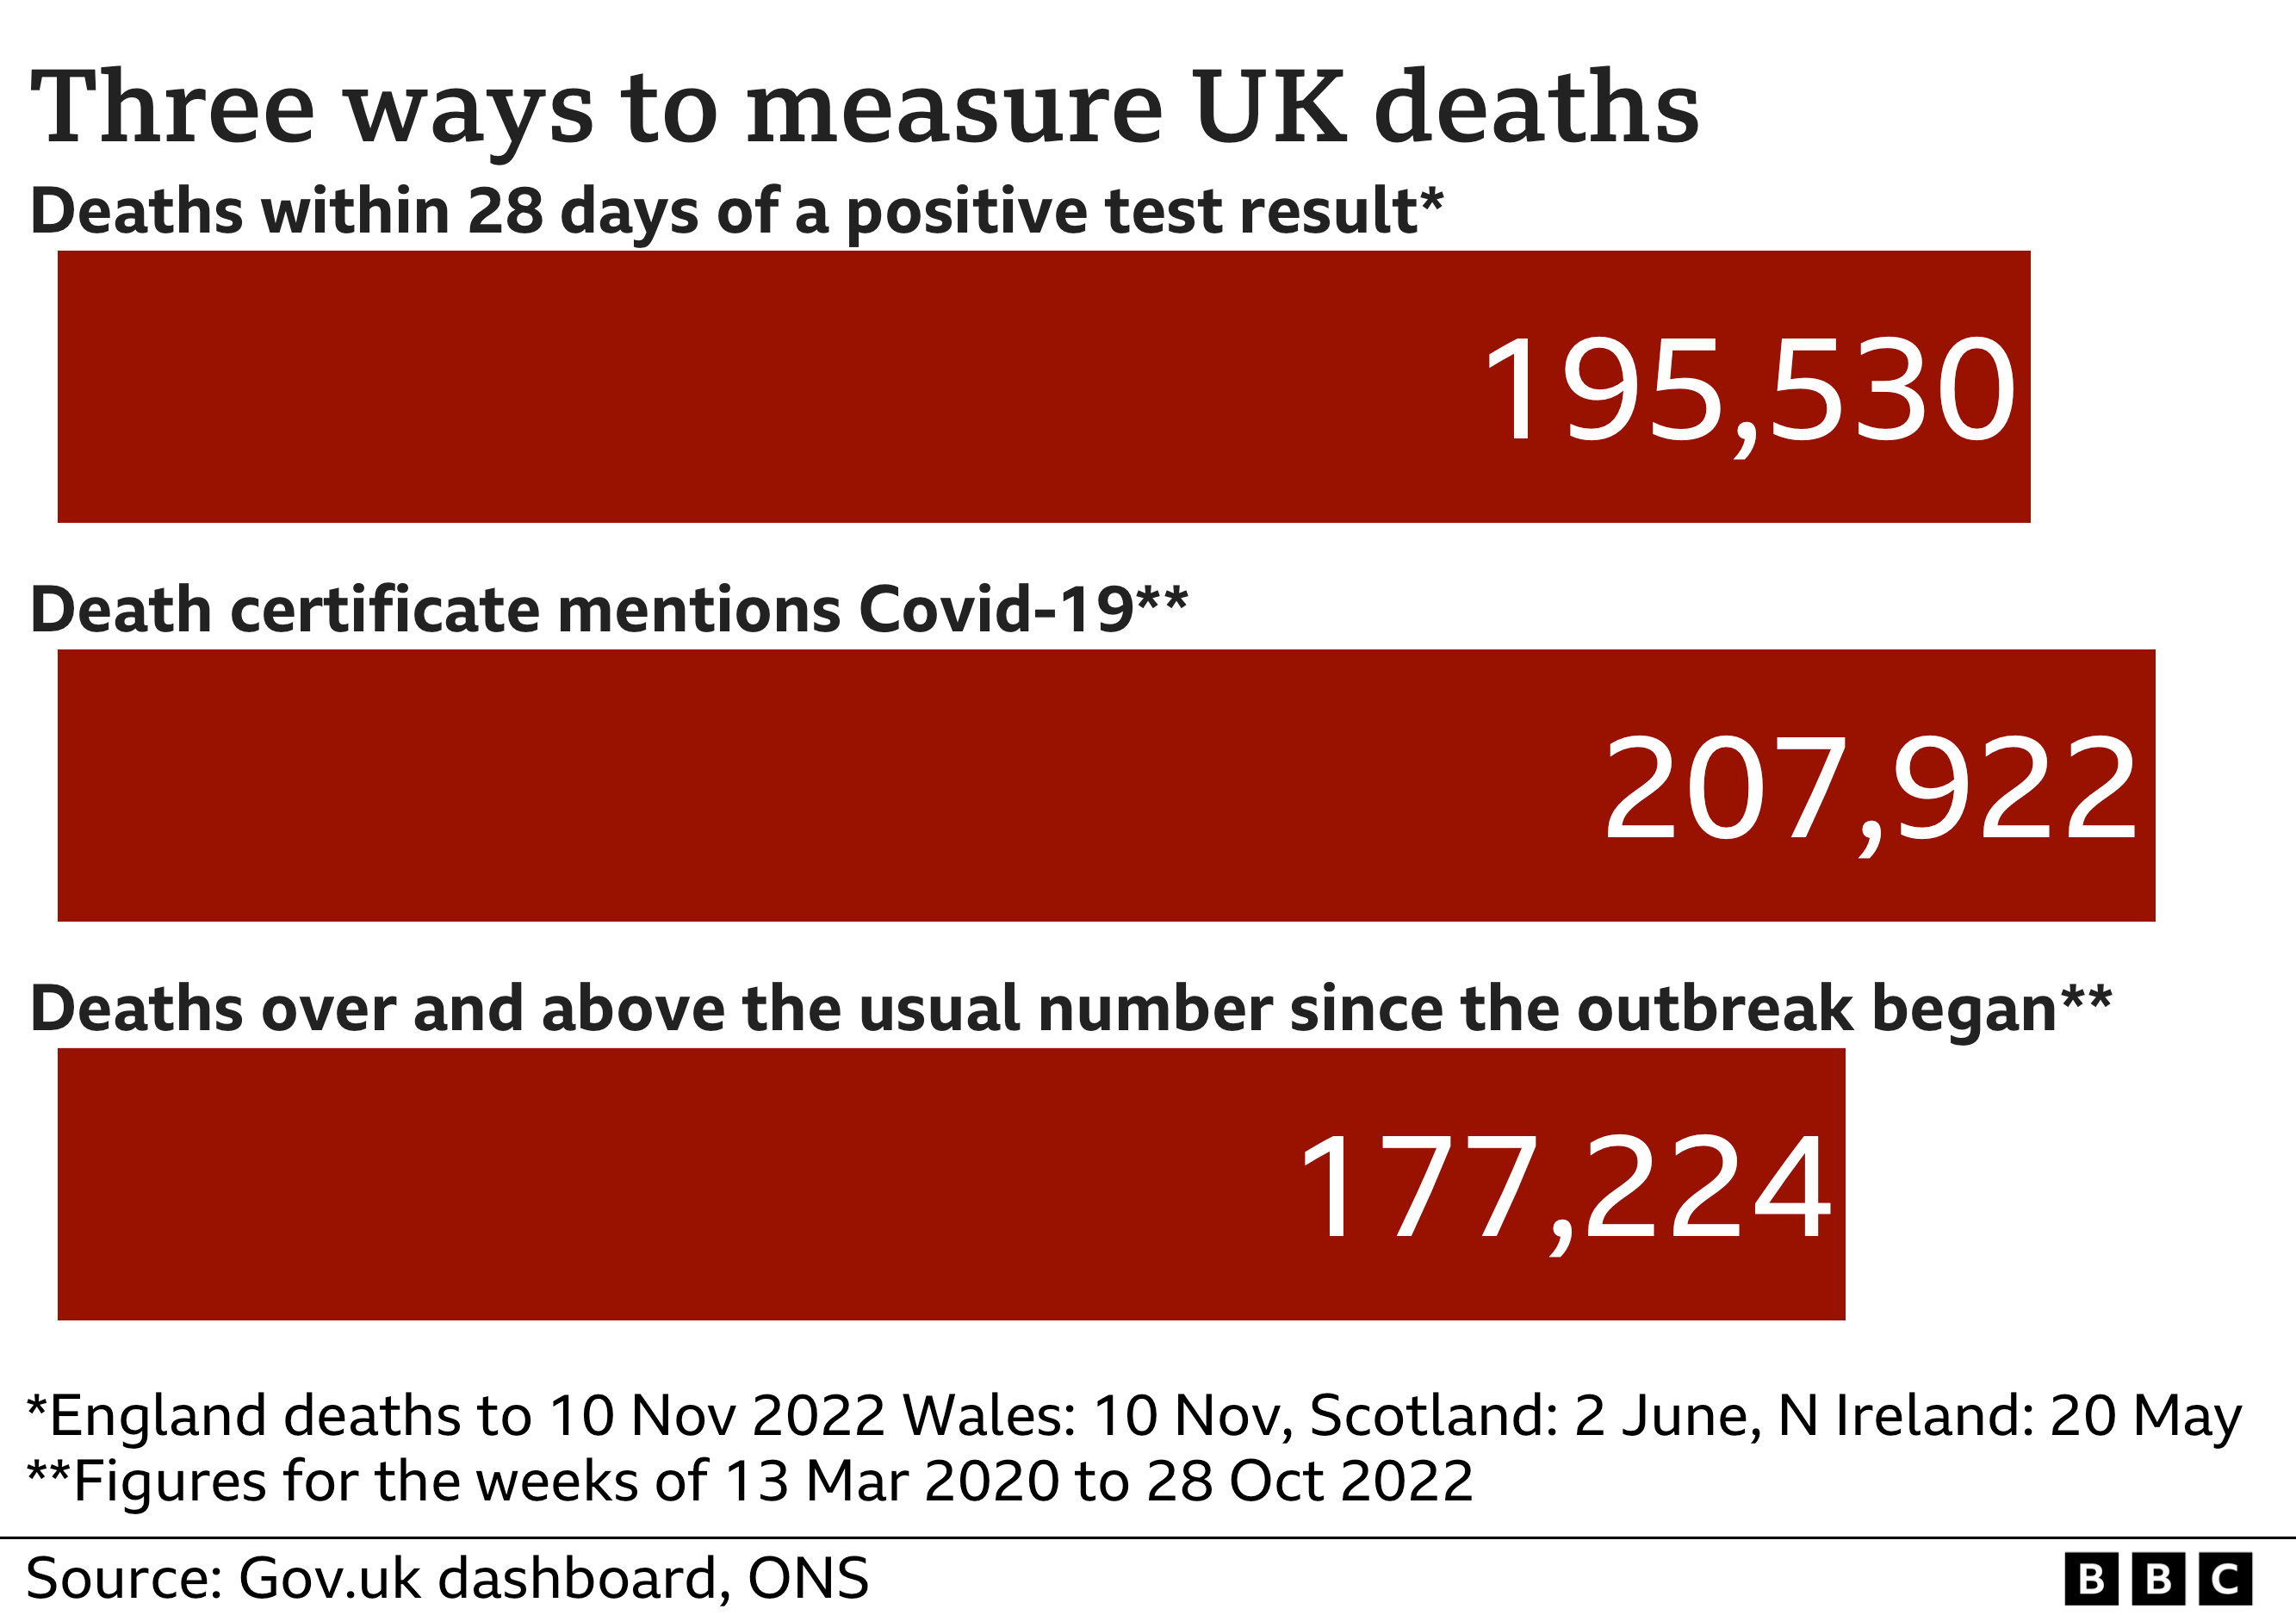 Chart showing three ways to measure UK deaths. Deaths within 28 days of a positive test result to 10 Nov 2022, 195,53. Death certificate mentions Covid-19. Figures for the weeks of 13 March 2020 to 28 Oct 2022, 207,922. Deaths over and above the usual number since the outbreak began Figures for the weeks of 13 March 2020 to 28 Oct 2022, 177,224.